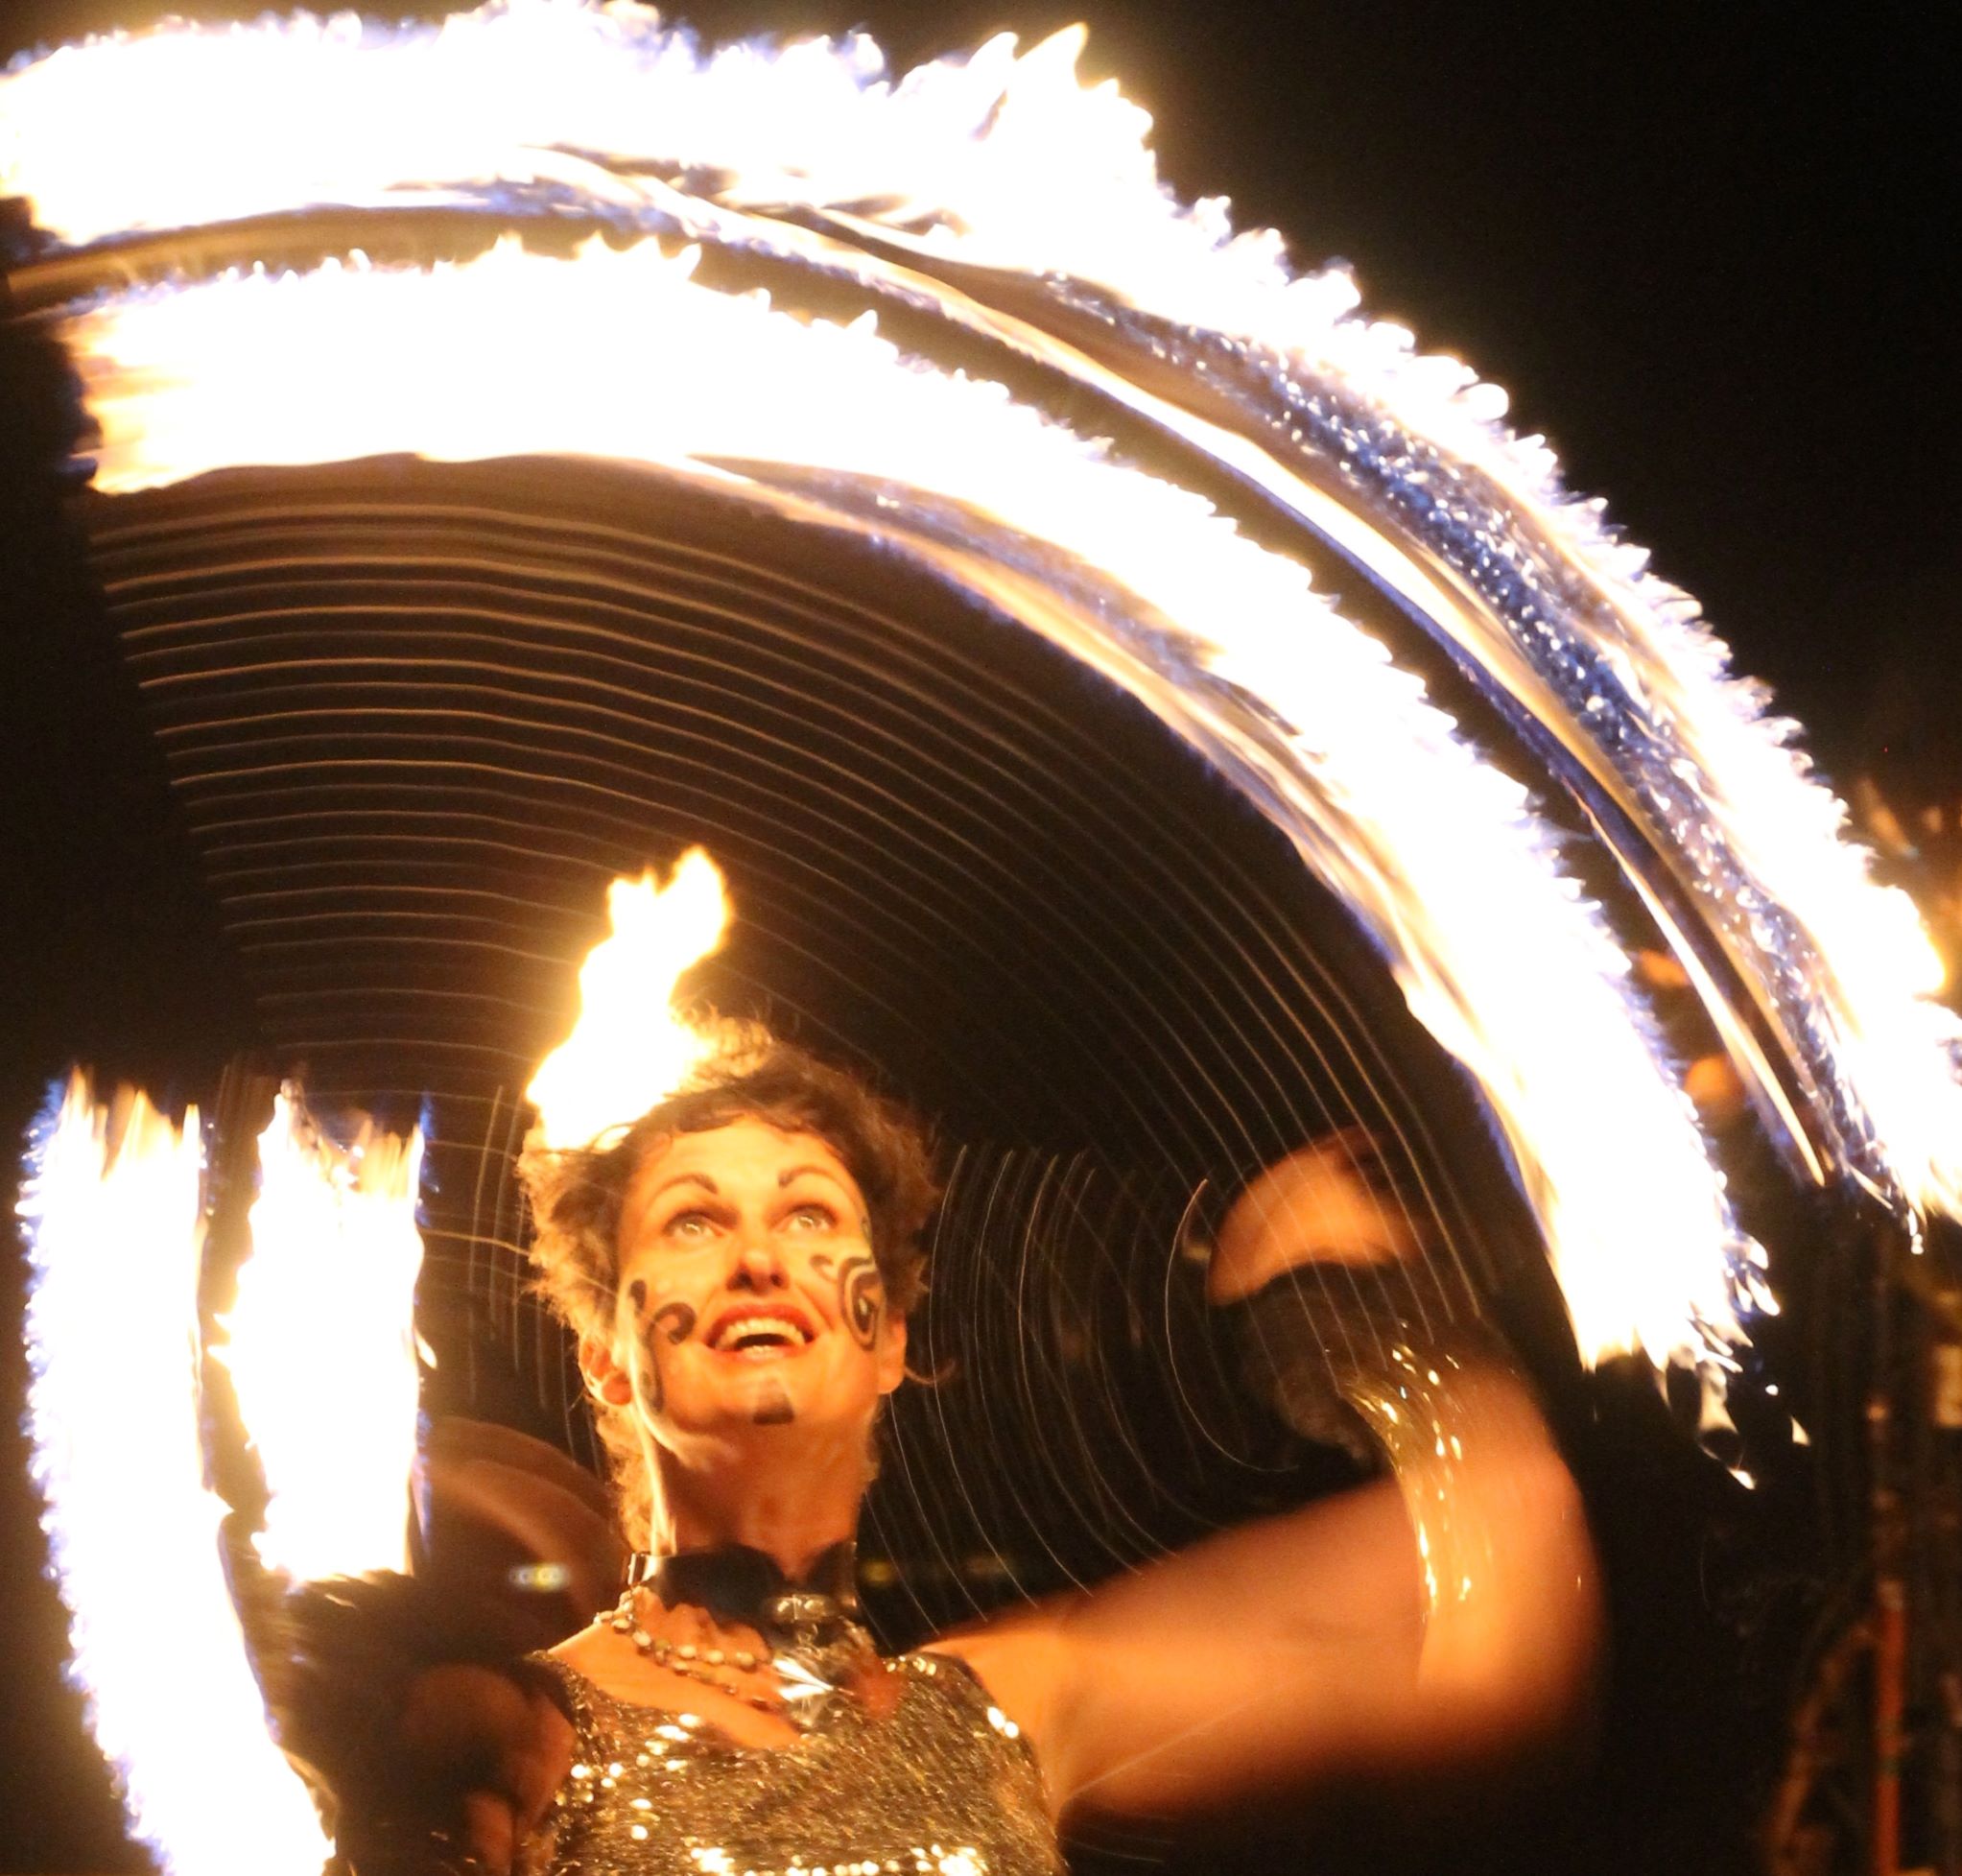 I love to perform with fire. My fire crown and fingers (both self made) are favourites but here I'm spinning poi.